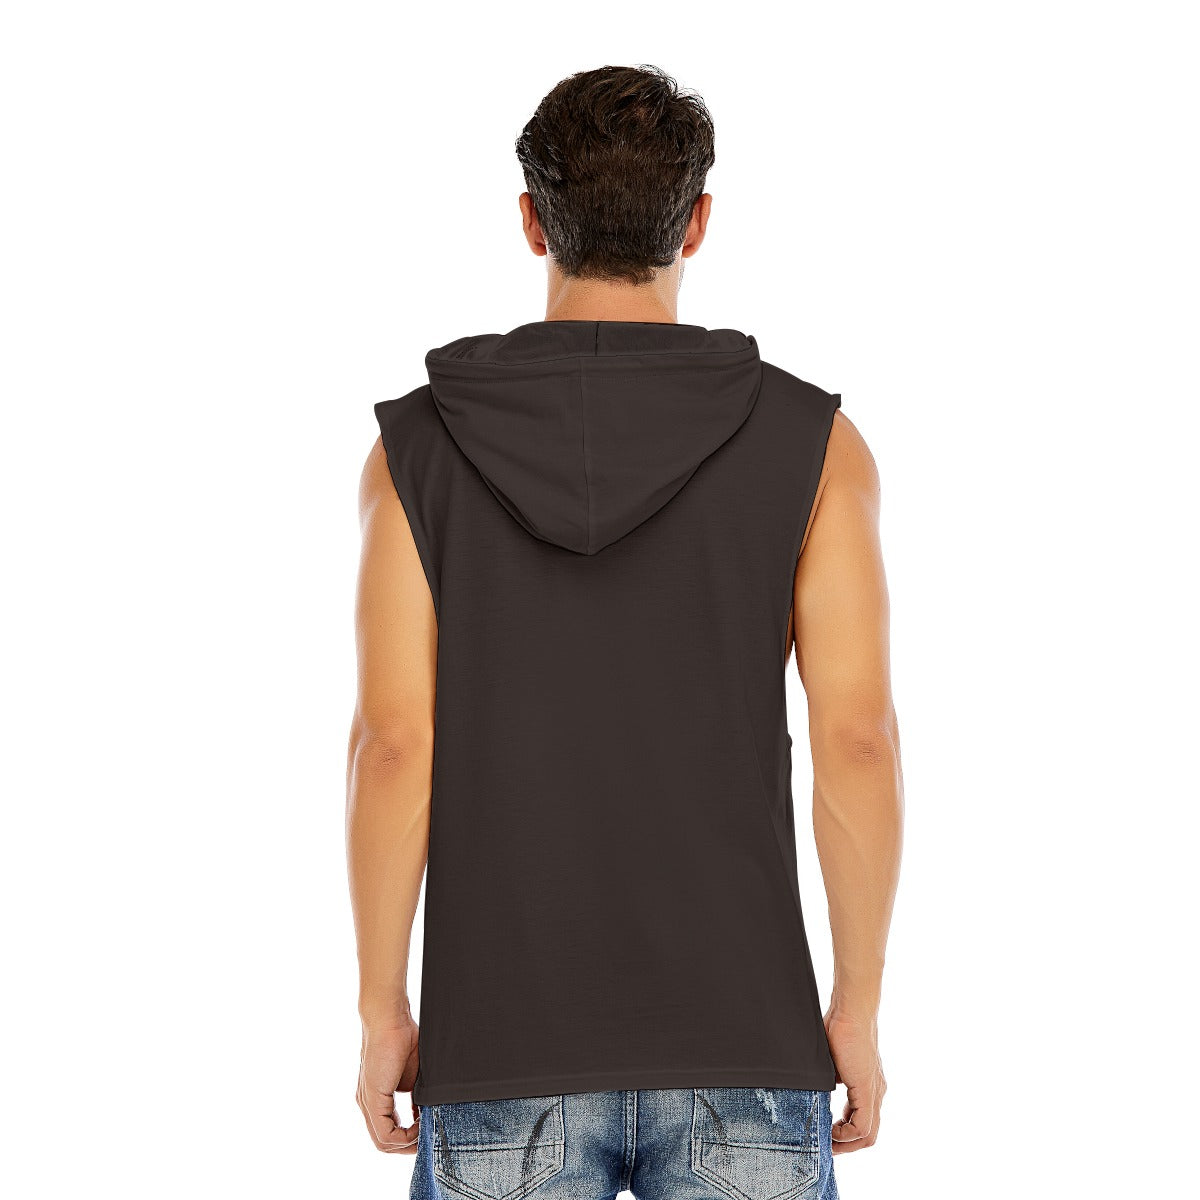 Trust No One Sleeveless Vest Pullover Hoodie